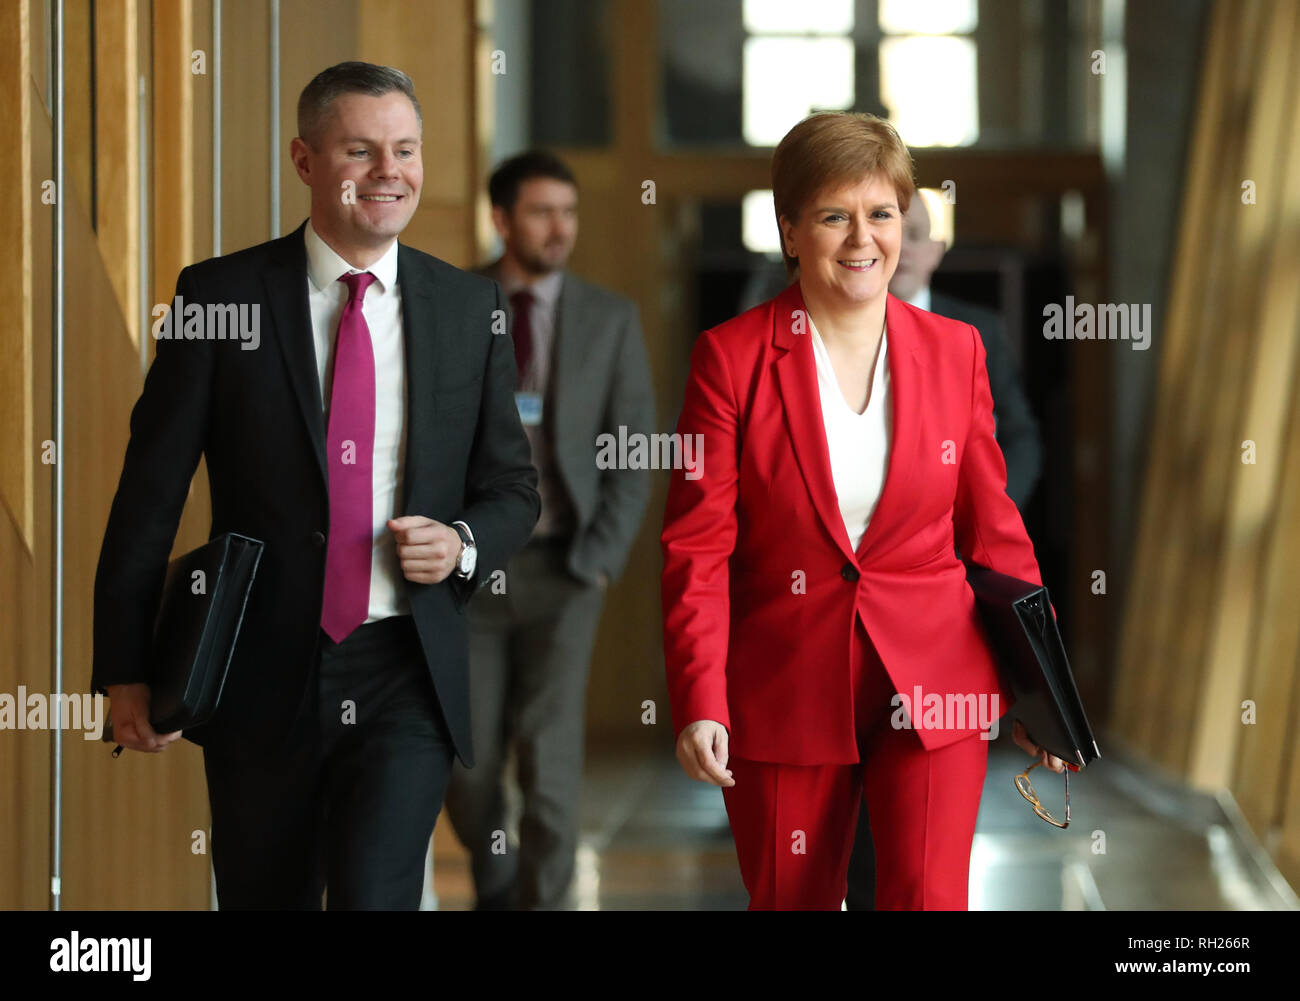 First Minister Nicola Sturgeon and Cabinet Secretary for Finance, Economy and Fair Work Derek Mackay arrive ahead of First Minister's Questions at the Scottish Parliament in Edinburgh. Stock Photo